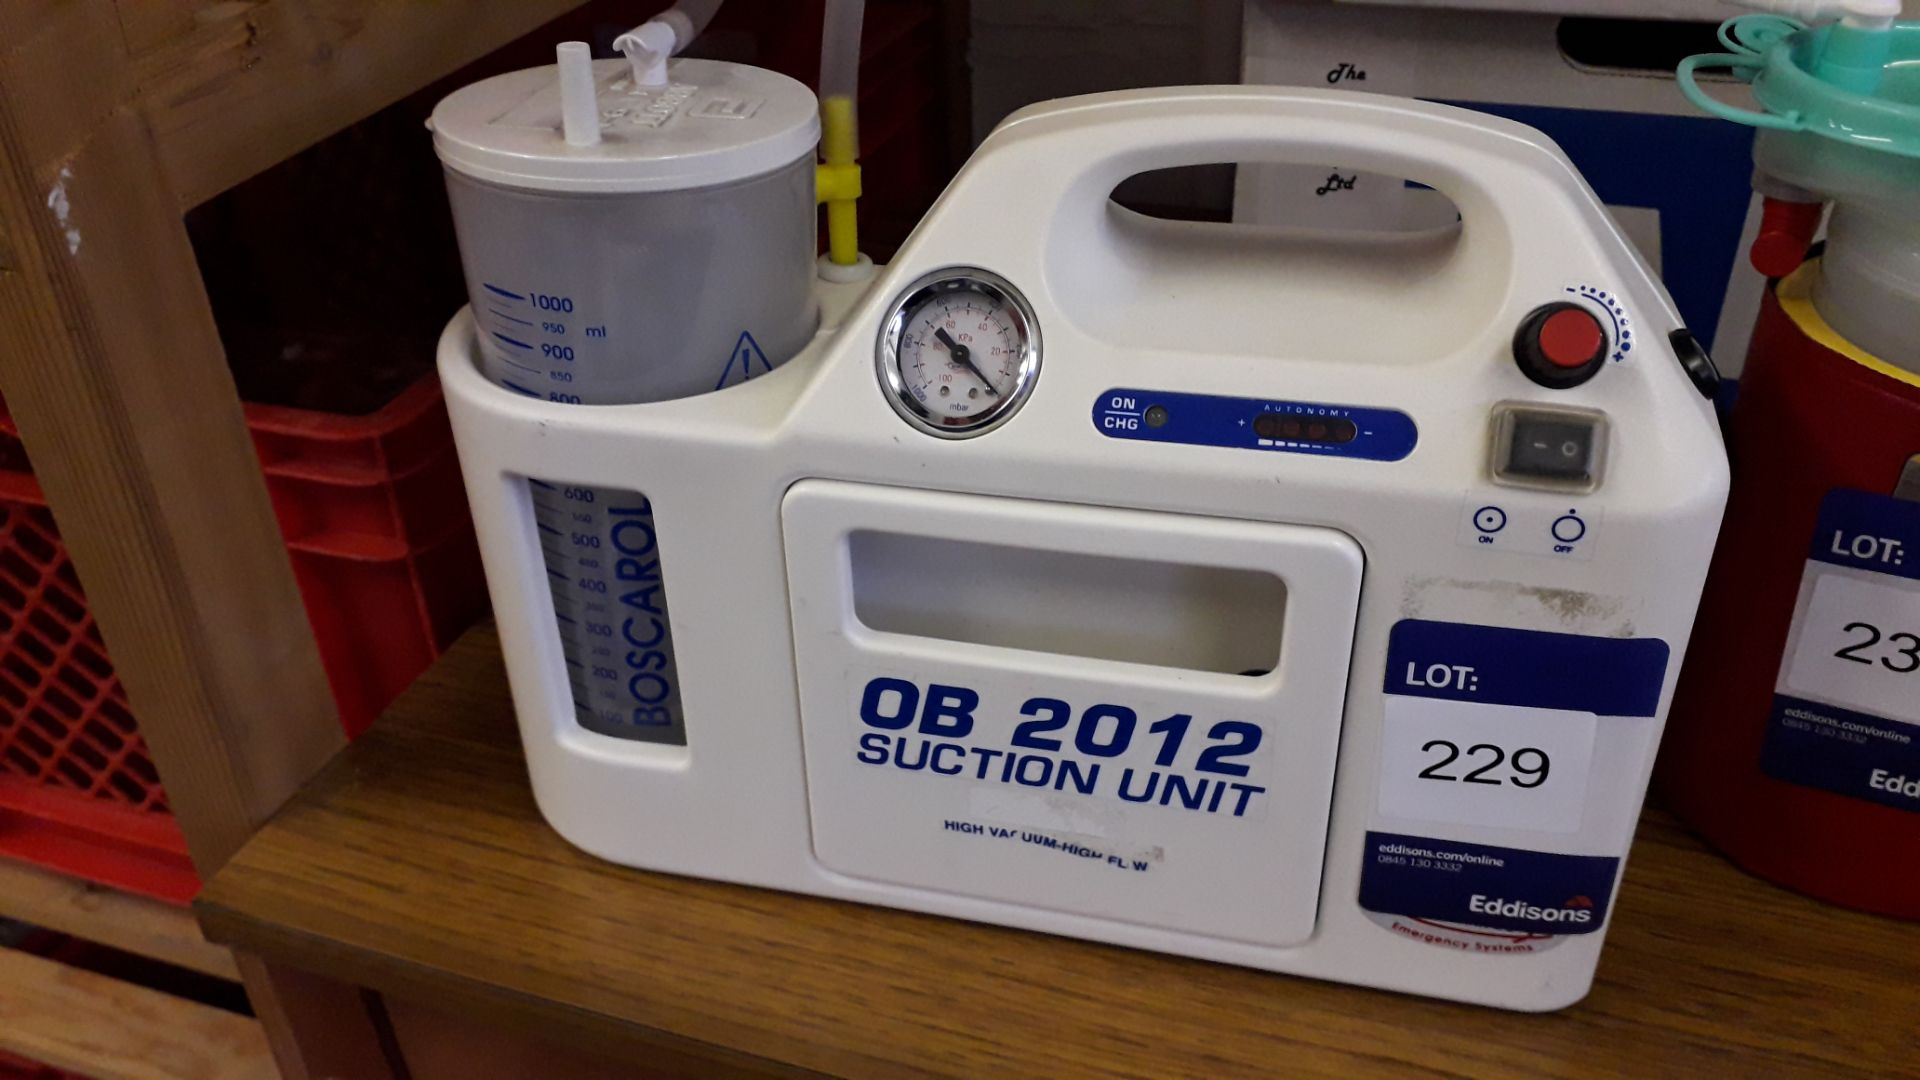 OB2012 Emergency Portable Suction Unit with Autocl